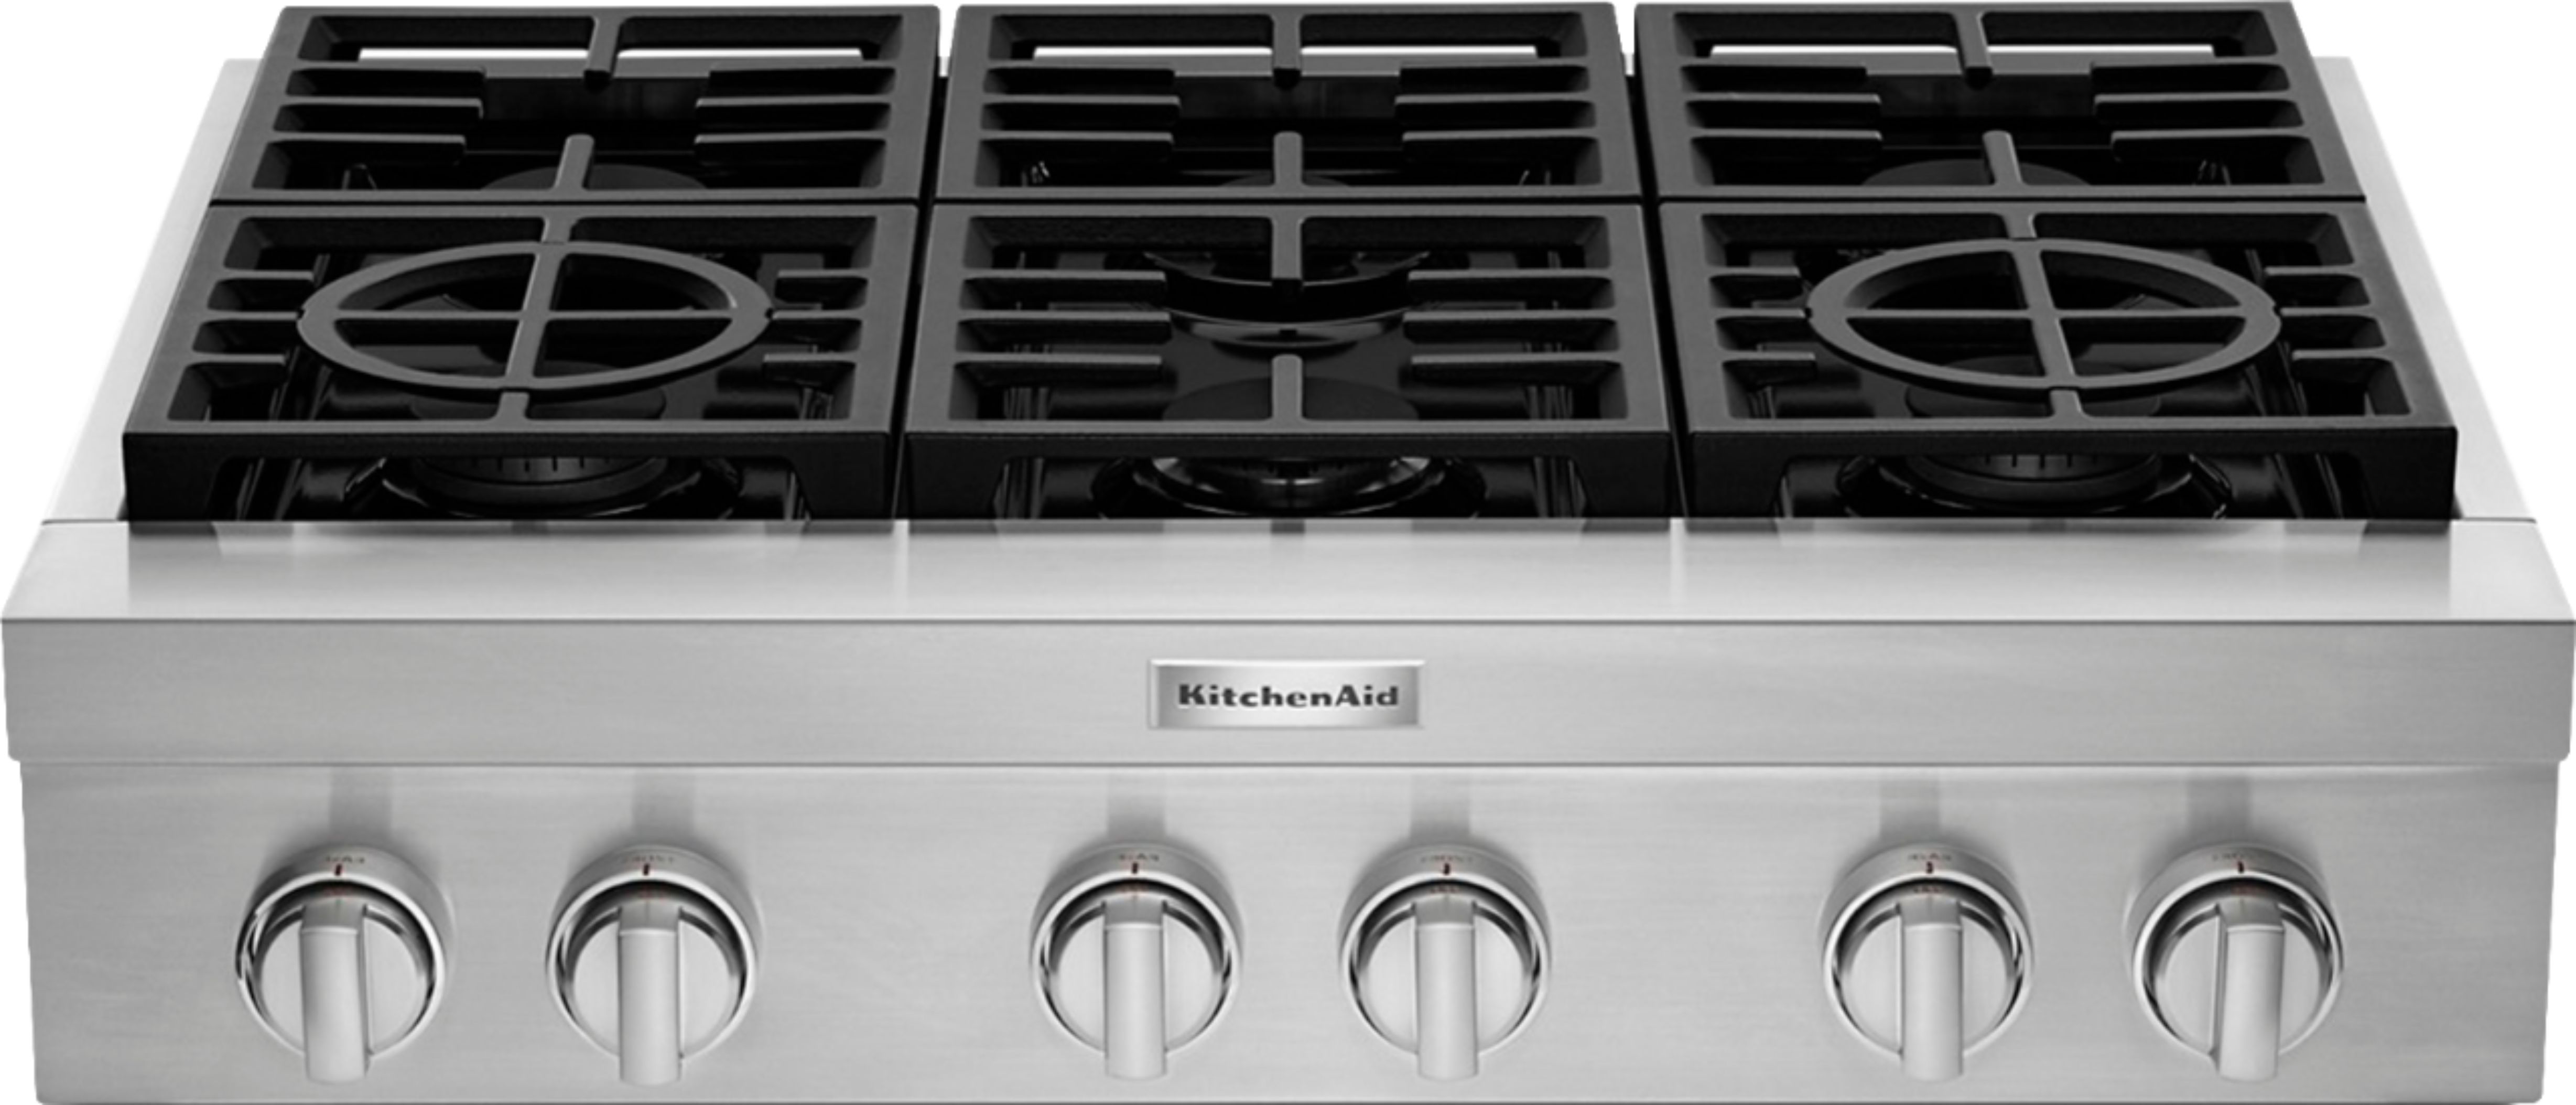 KitchenAid Commercial-Style 36" Built-In Gas Cooktop Stainless steel KCGC506JSS - Best Buy | Best Buy U.S.